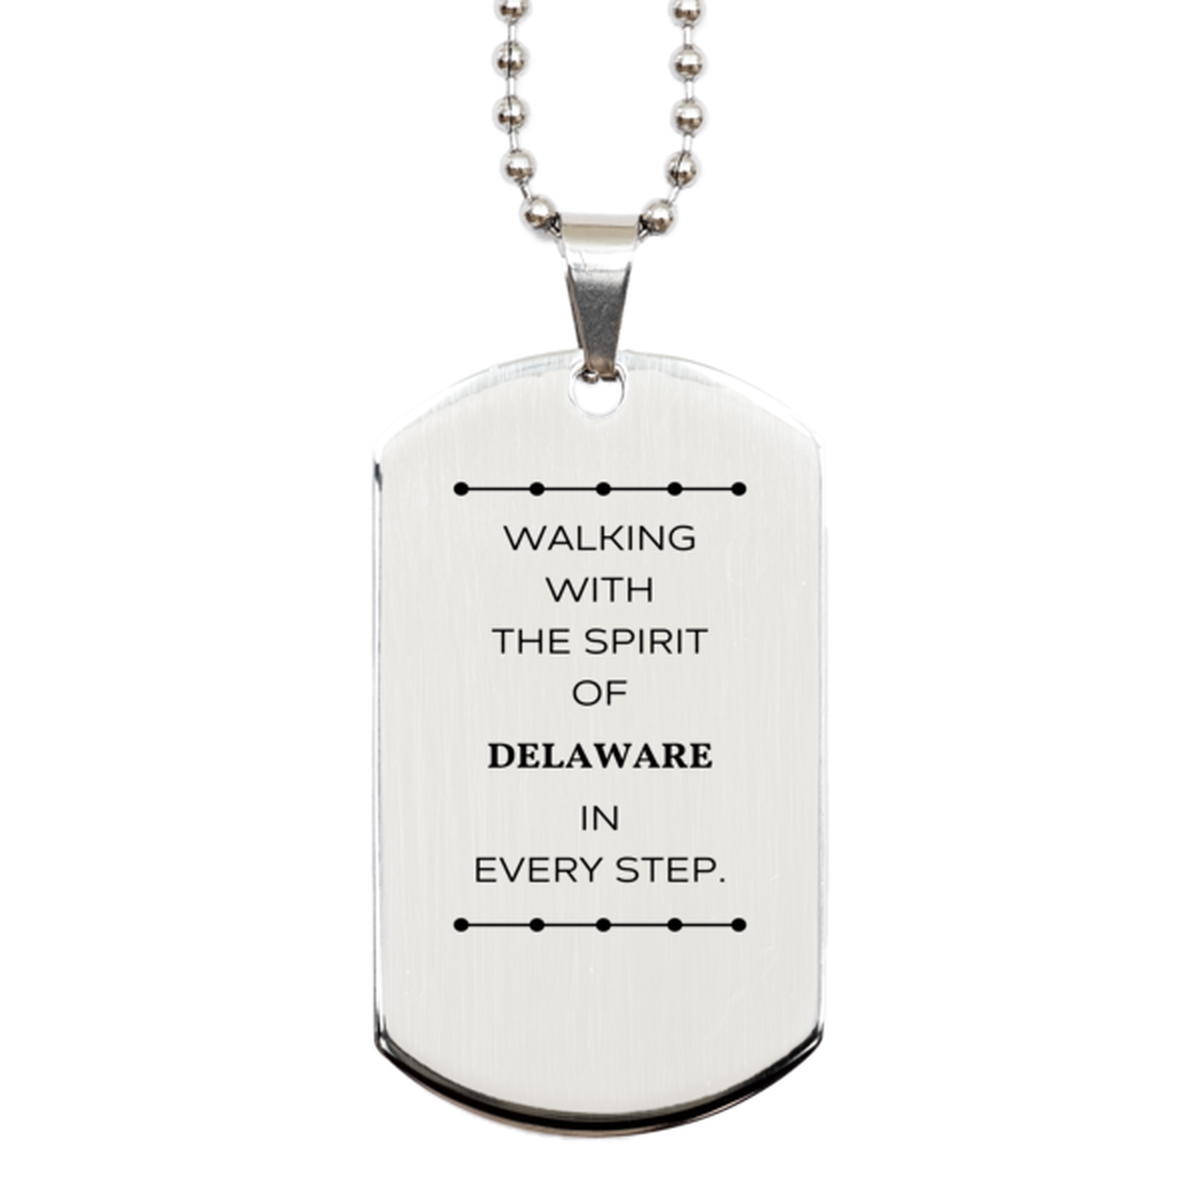 Delaware Gifts, Walking with the spirit, Love Delaware Birthday Christmas Silver Dog Tag For Delaware People, Men, Women, Friends